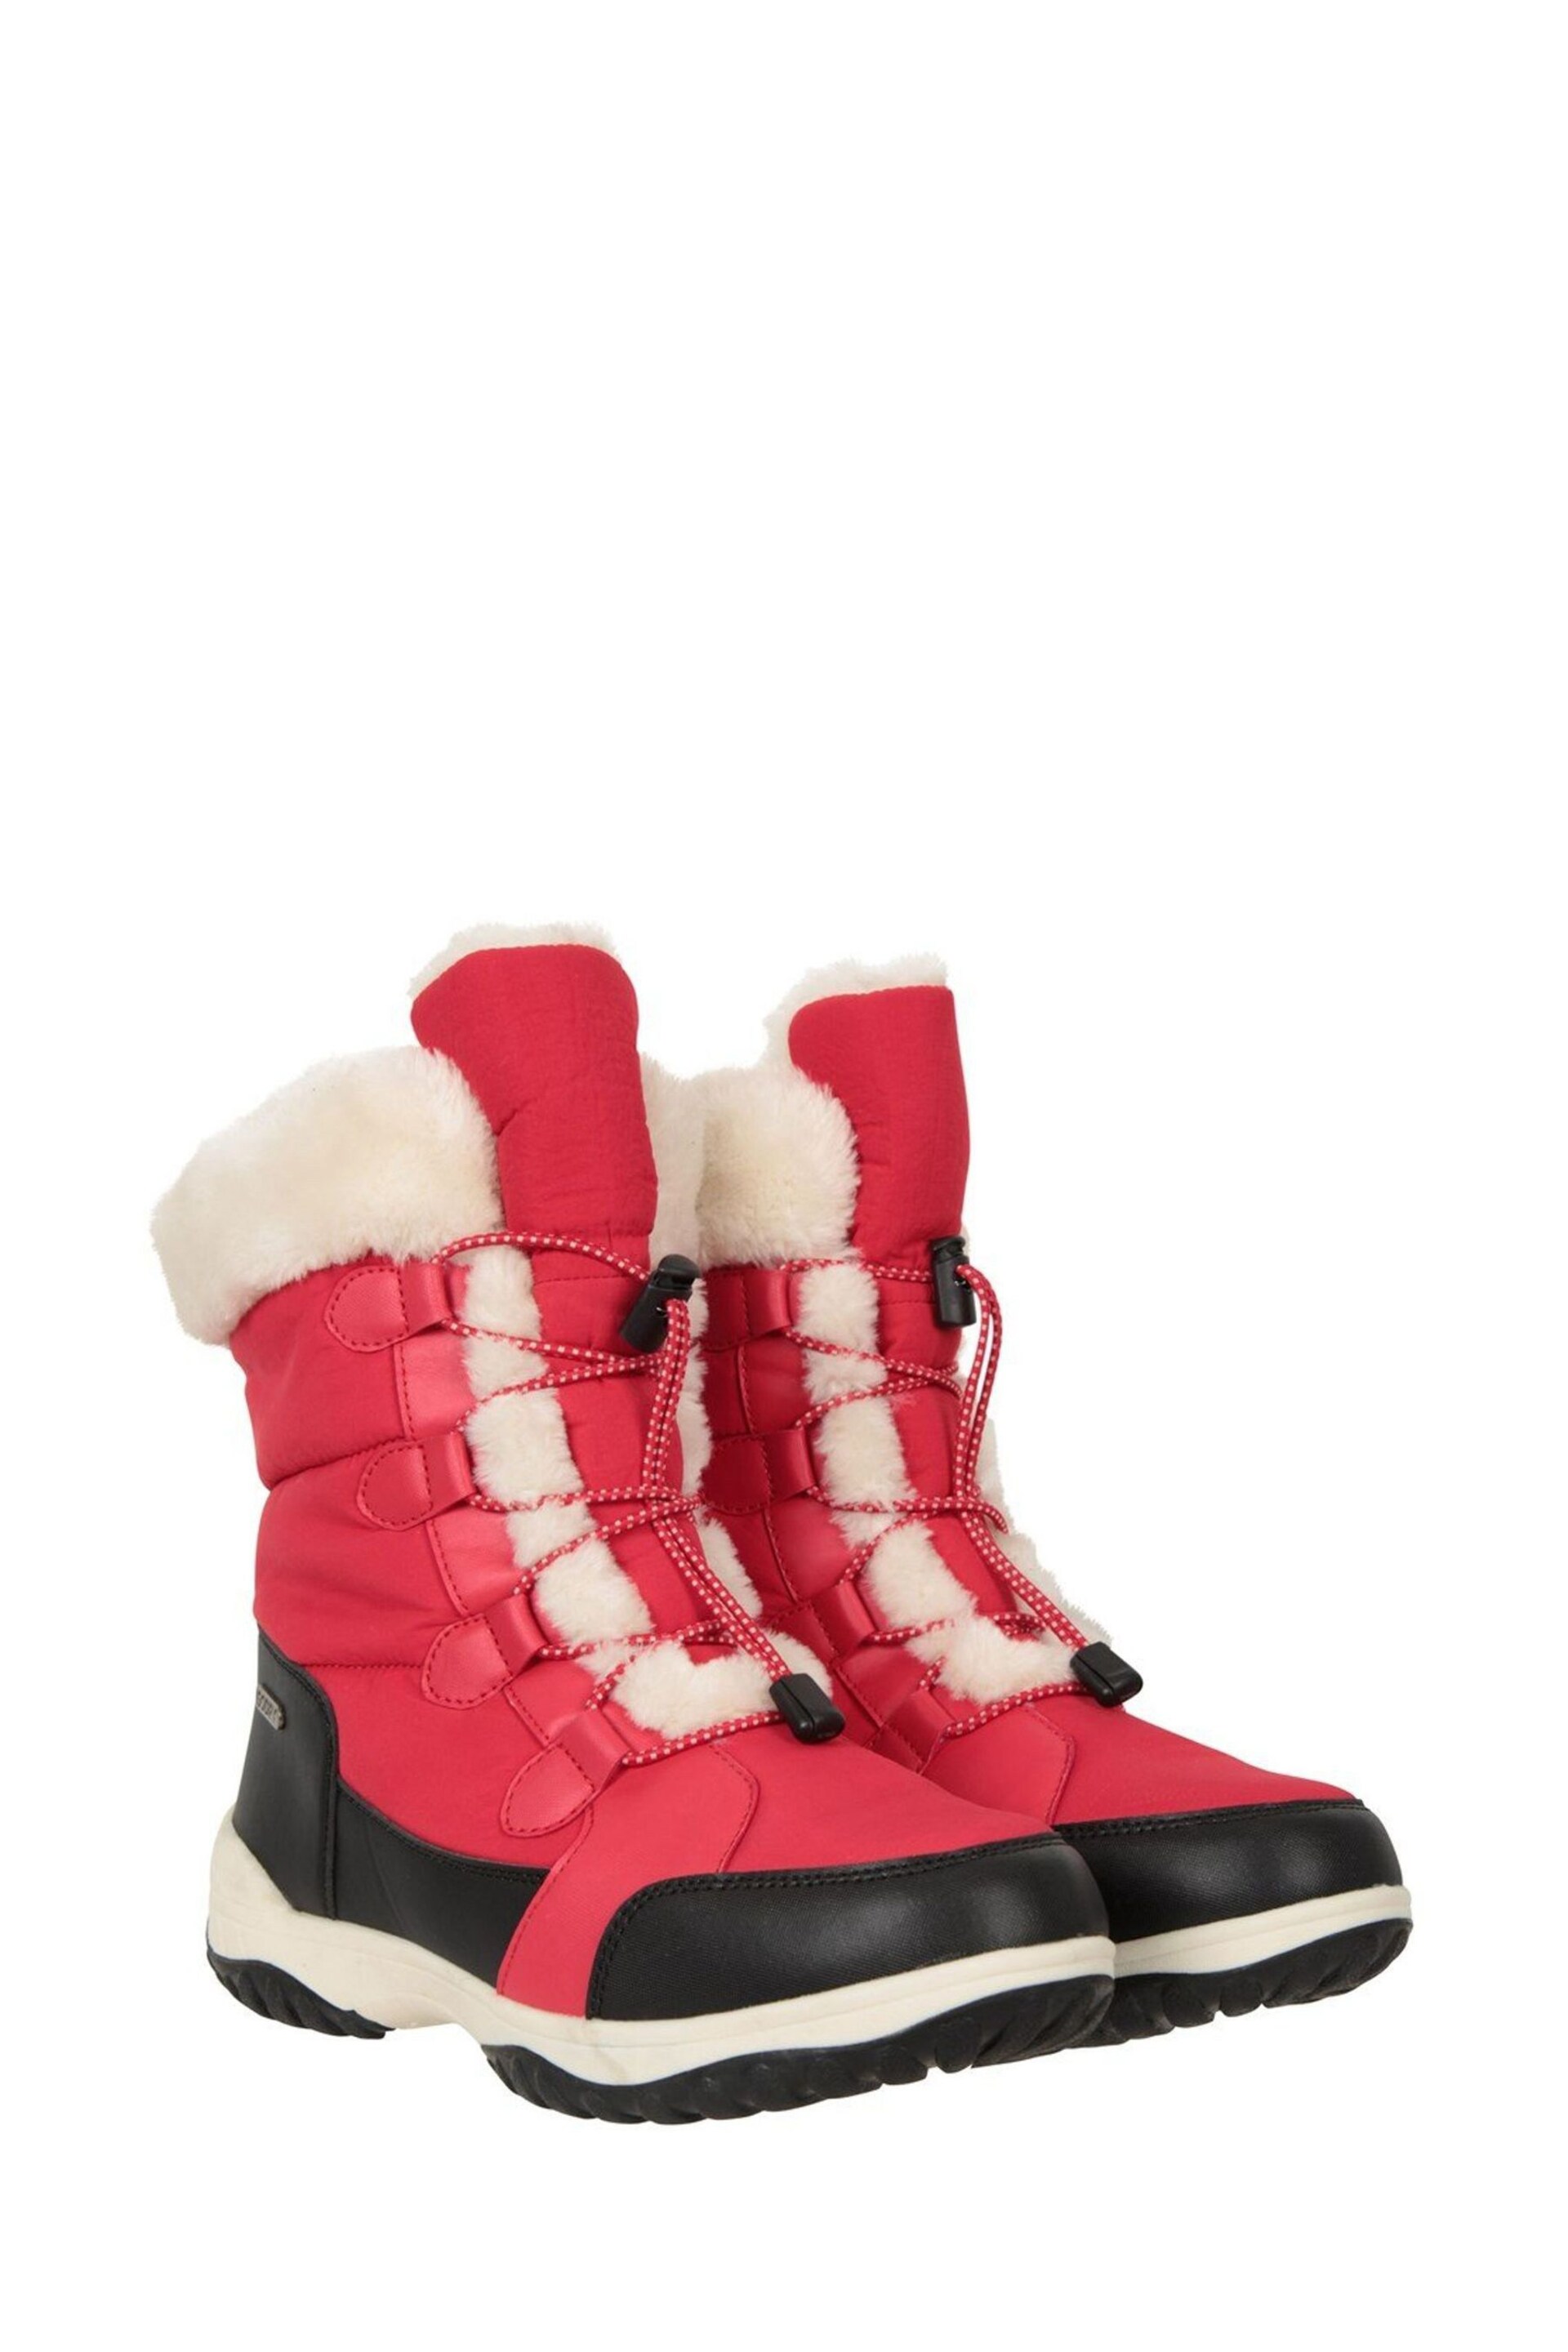 Mountain Warehouse Red Snowflake Snow Boots - Image 1 of 3